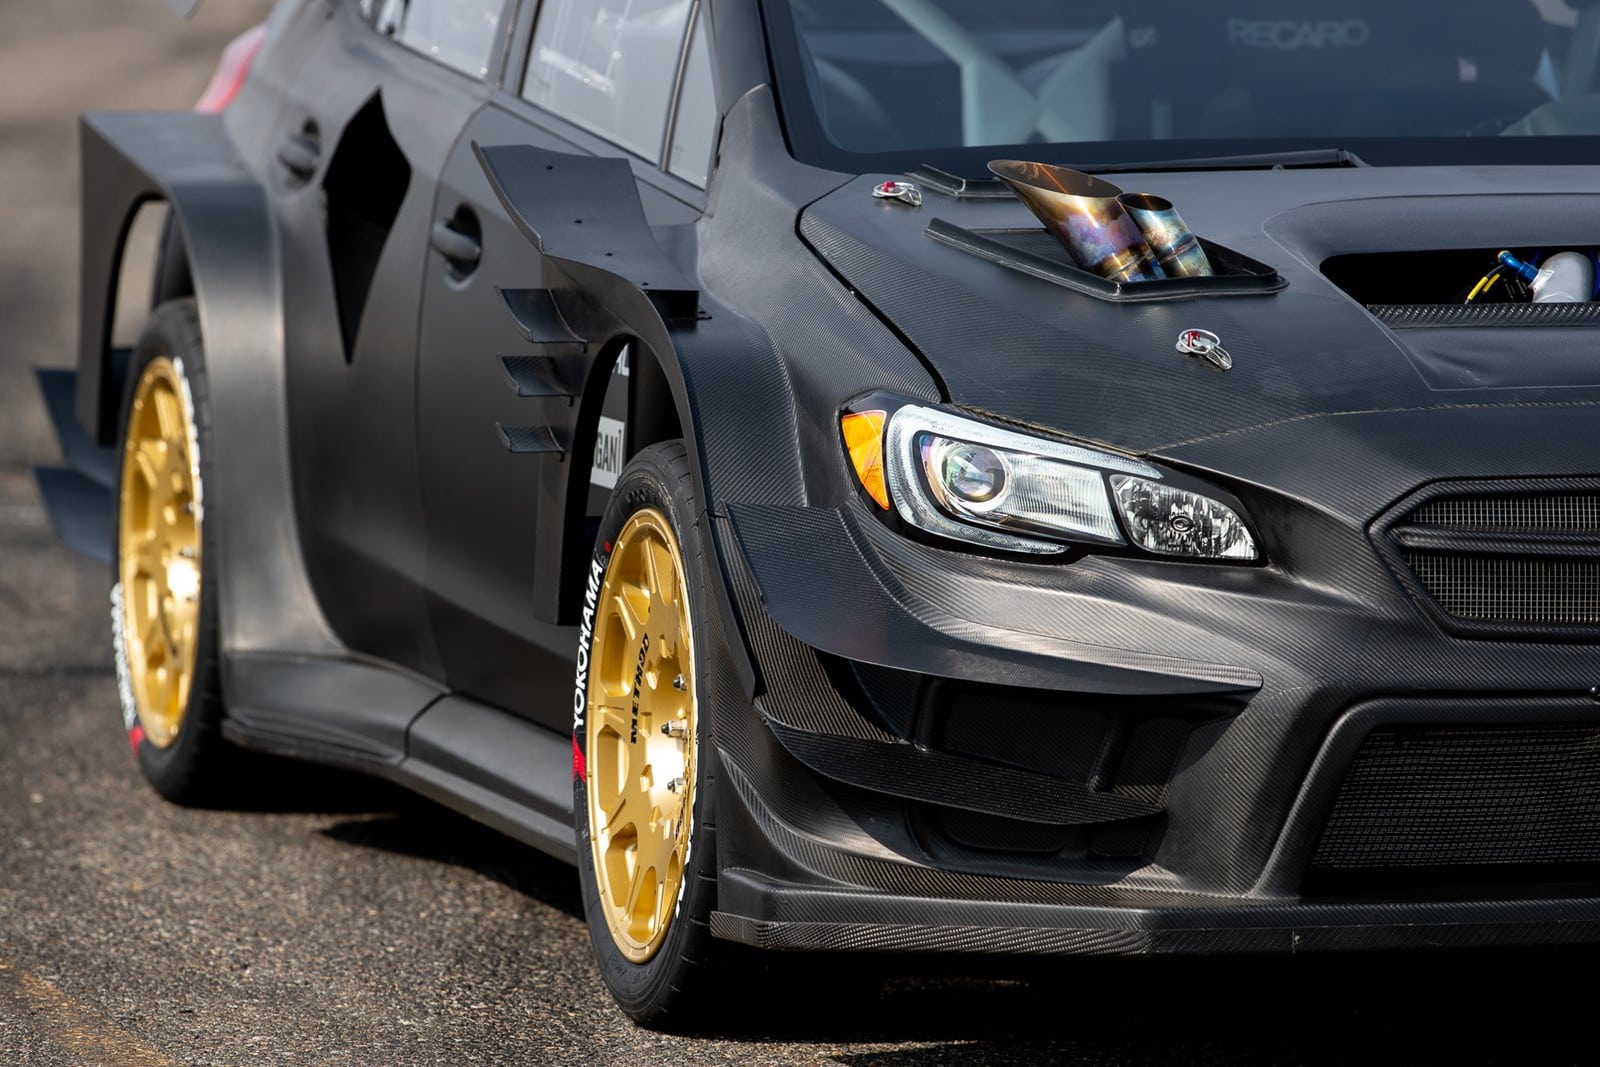 This is how wild the Subaru WRX STI is in action with 874 hp from the Gymkhana 11